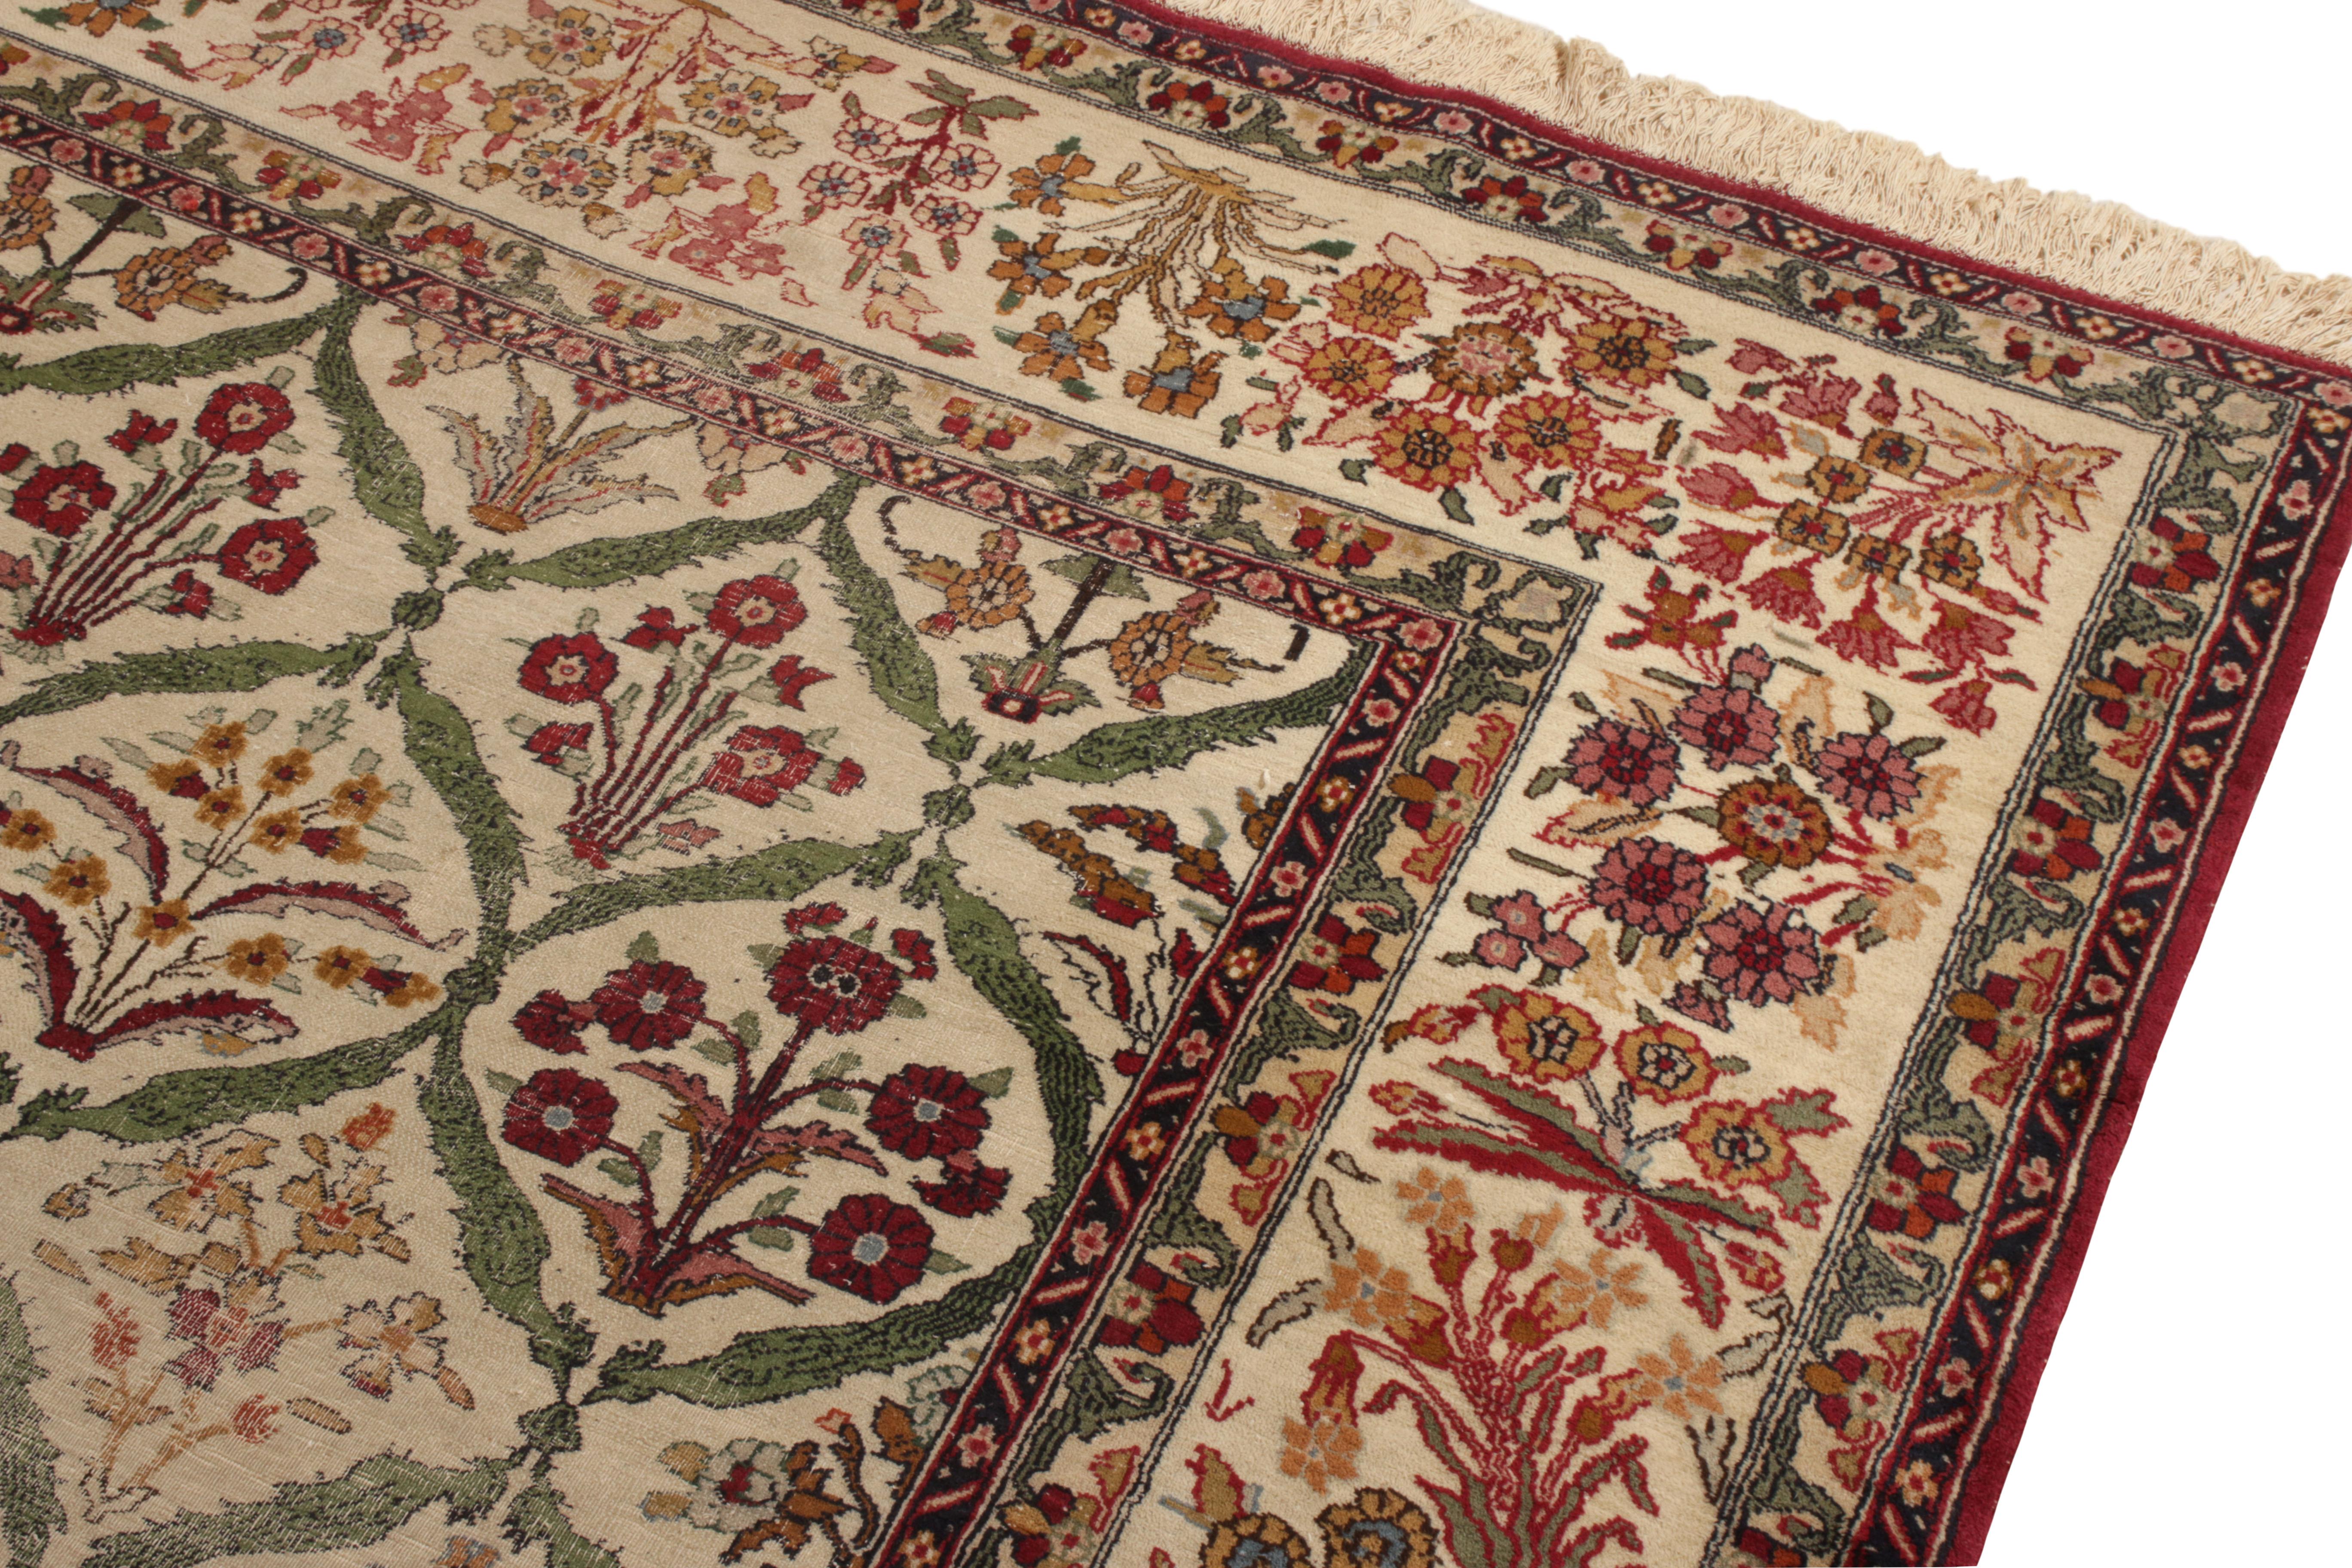 Turkish Hand-Knotted Antique Mogul Rug in Beige, Green Floral Pattern by Rug & Kilim For Sale